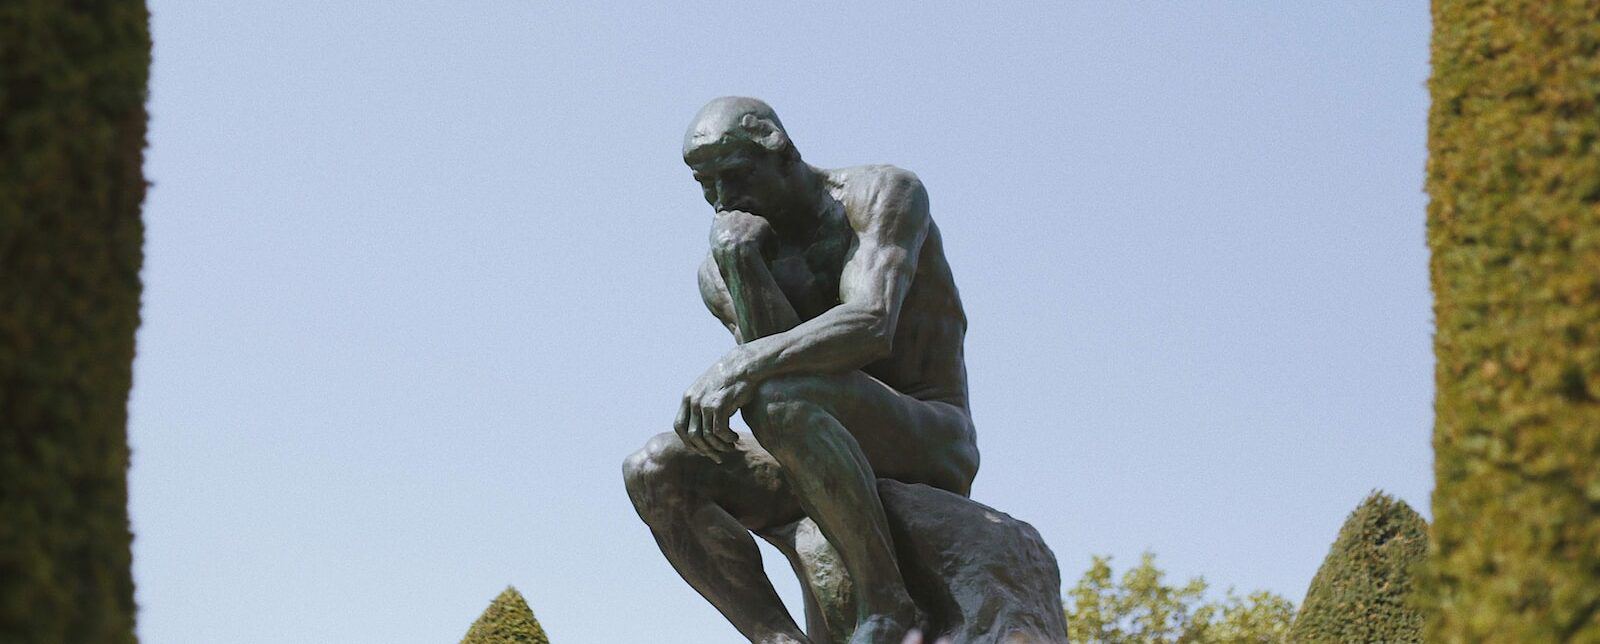 man sitting statue called the thinker